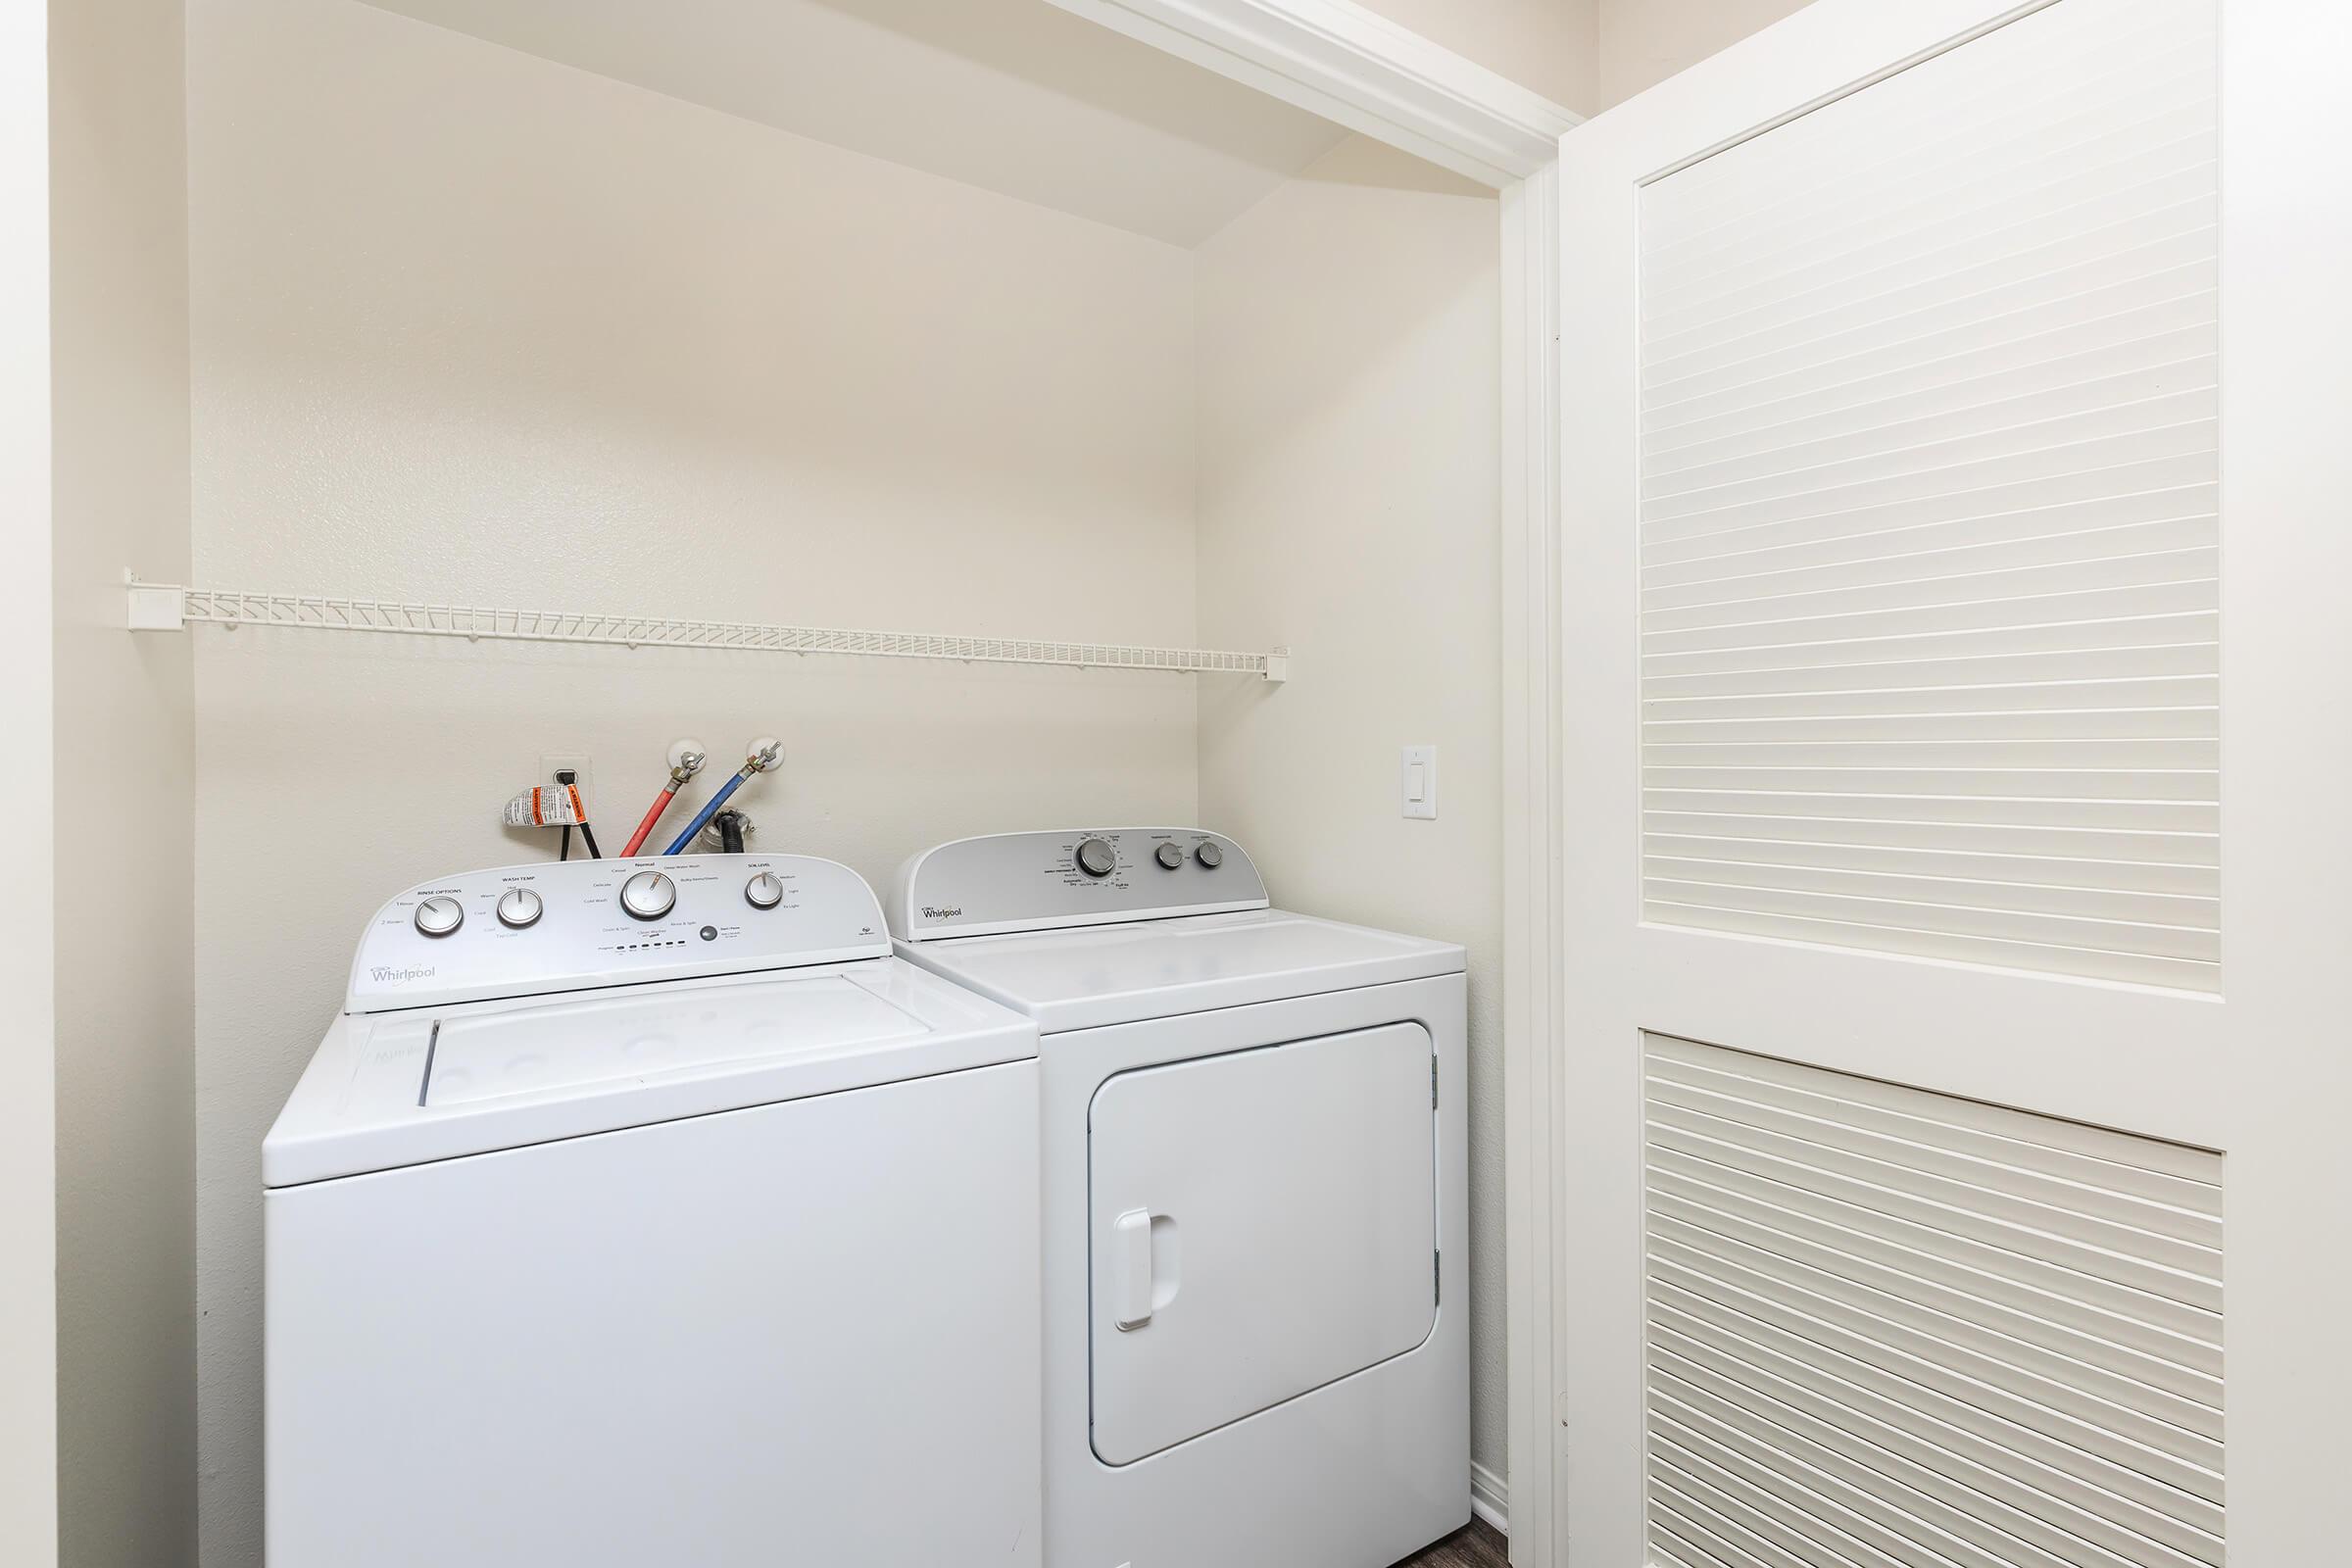 Laurel Terrace Apartment Homes provides in-home washers and dryers